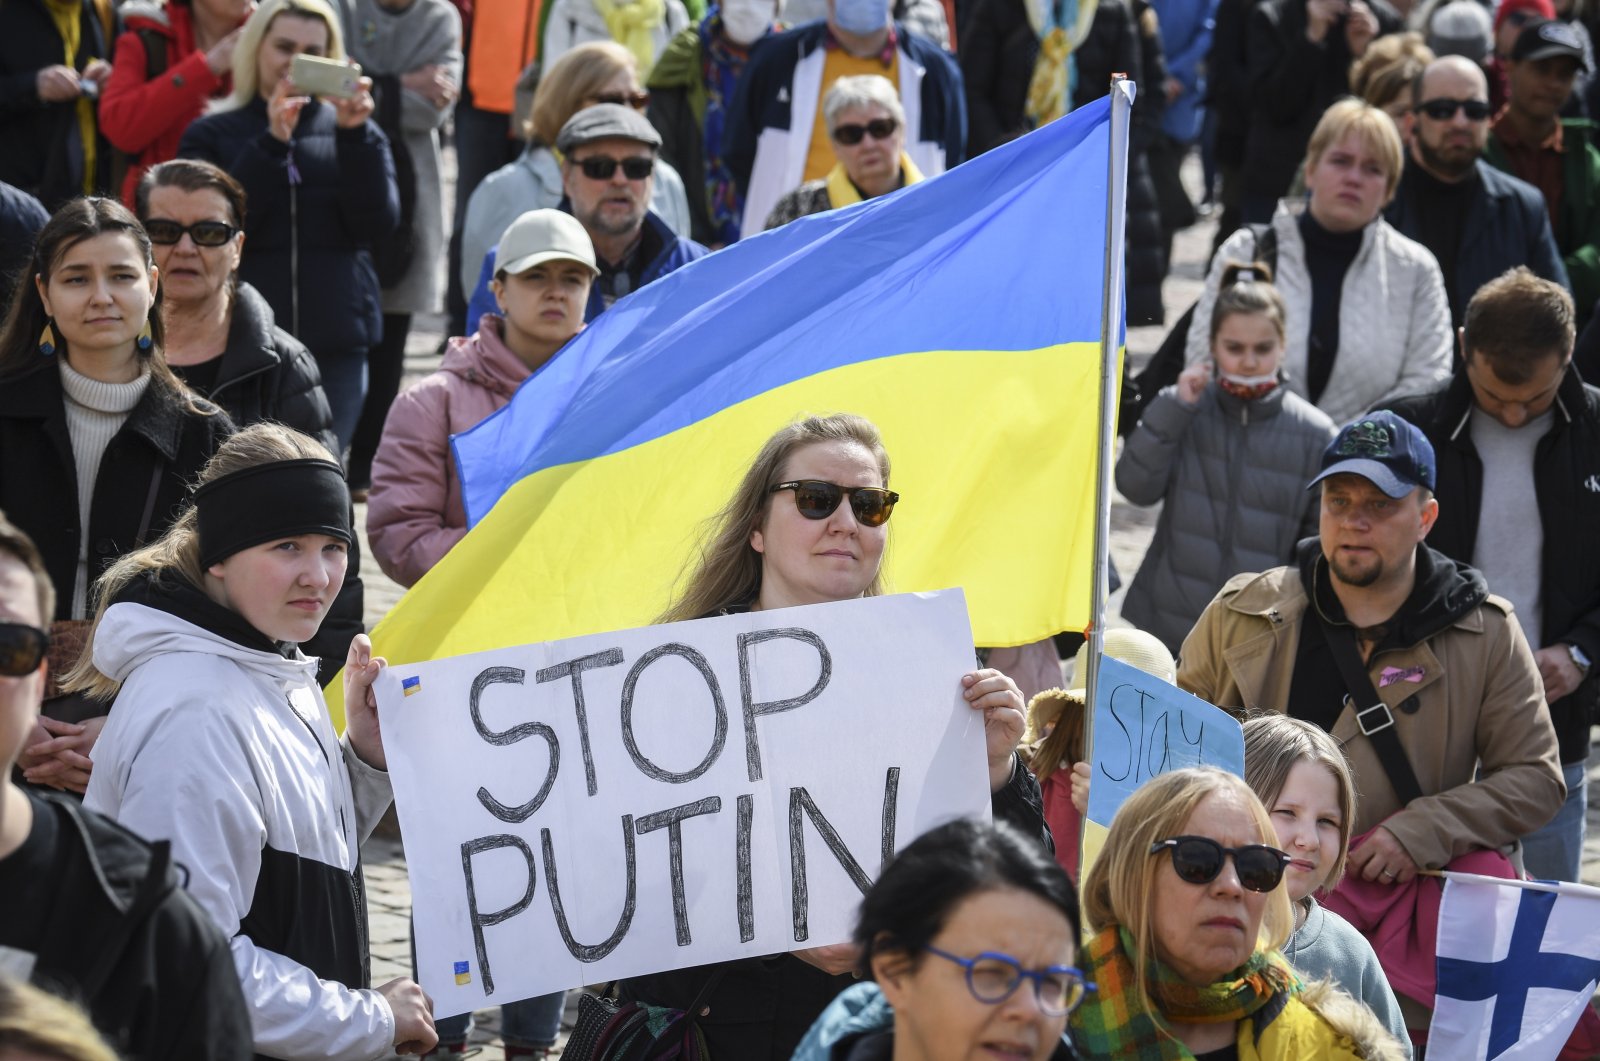 People attend the Free Ukraine - free world demonstration in the Senate Square in Helsinki, Finland, April 18, 2022.  (EPA Photo)